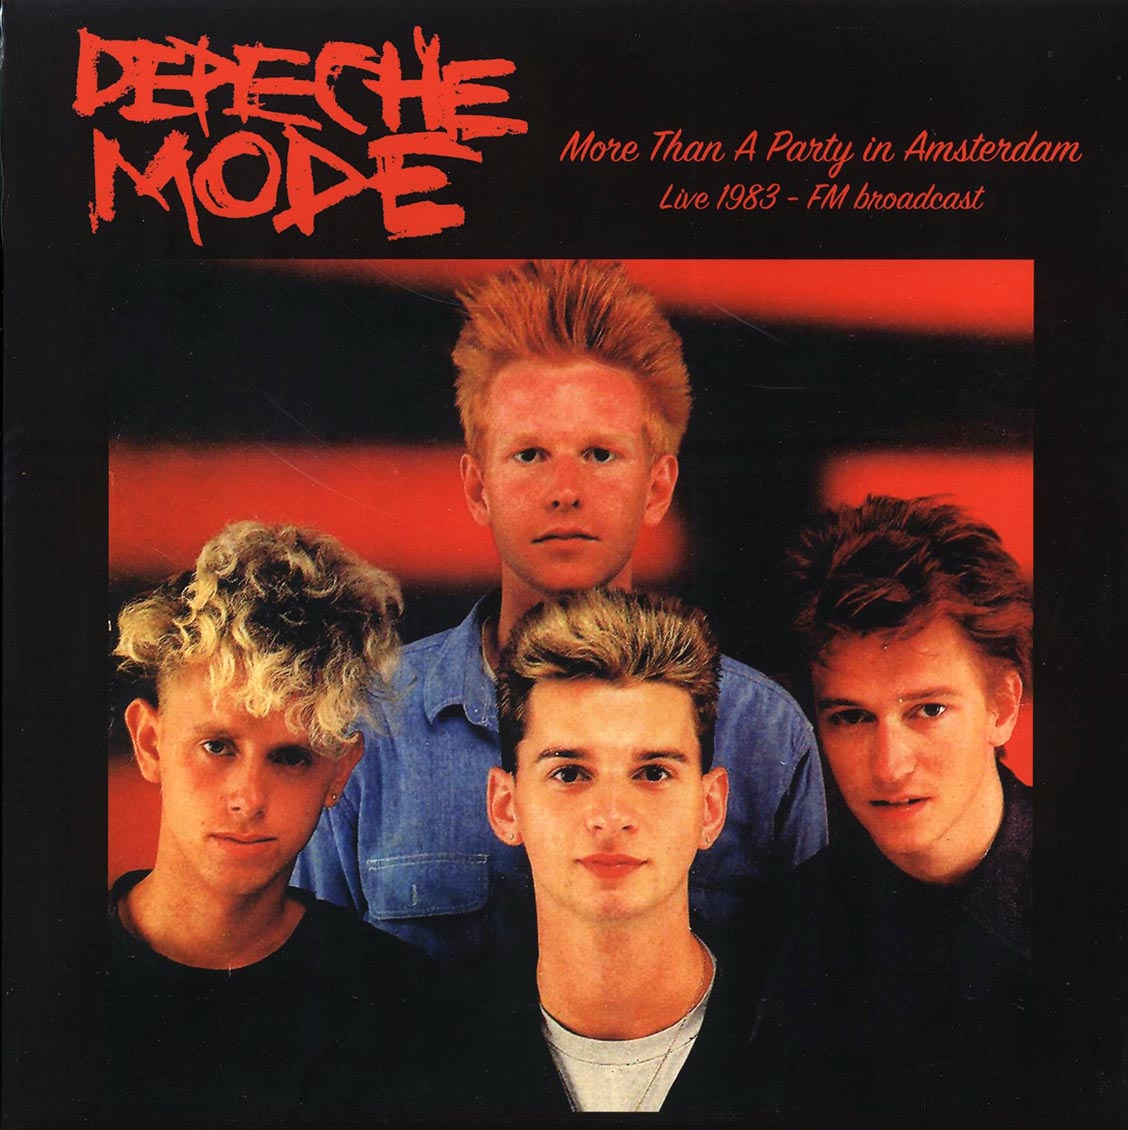 Depeche Mode - More Than A Party In Amsterdam: Live 1983 FM Broadcast (ltd. 500 copies made) - Vinyl LP